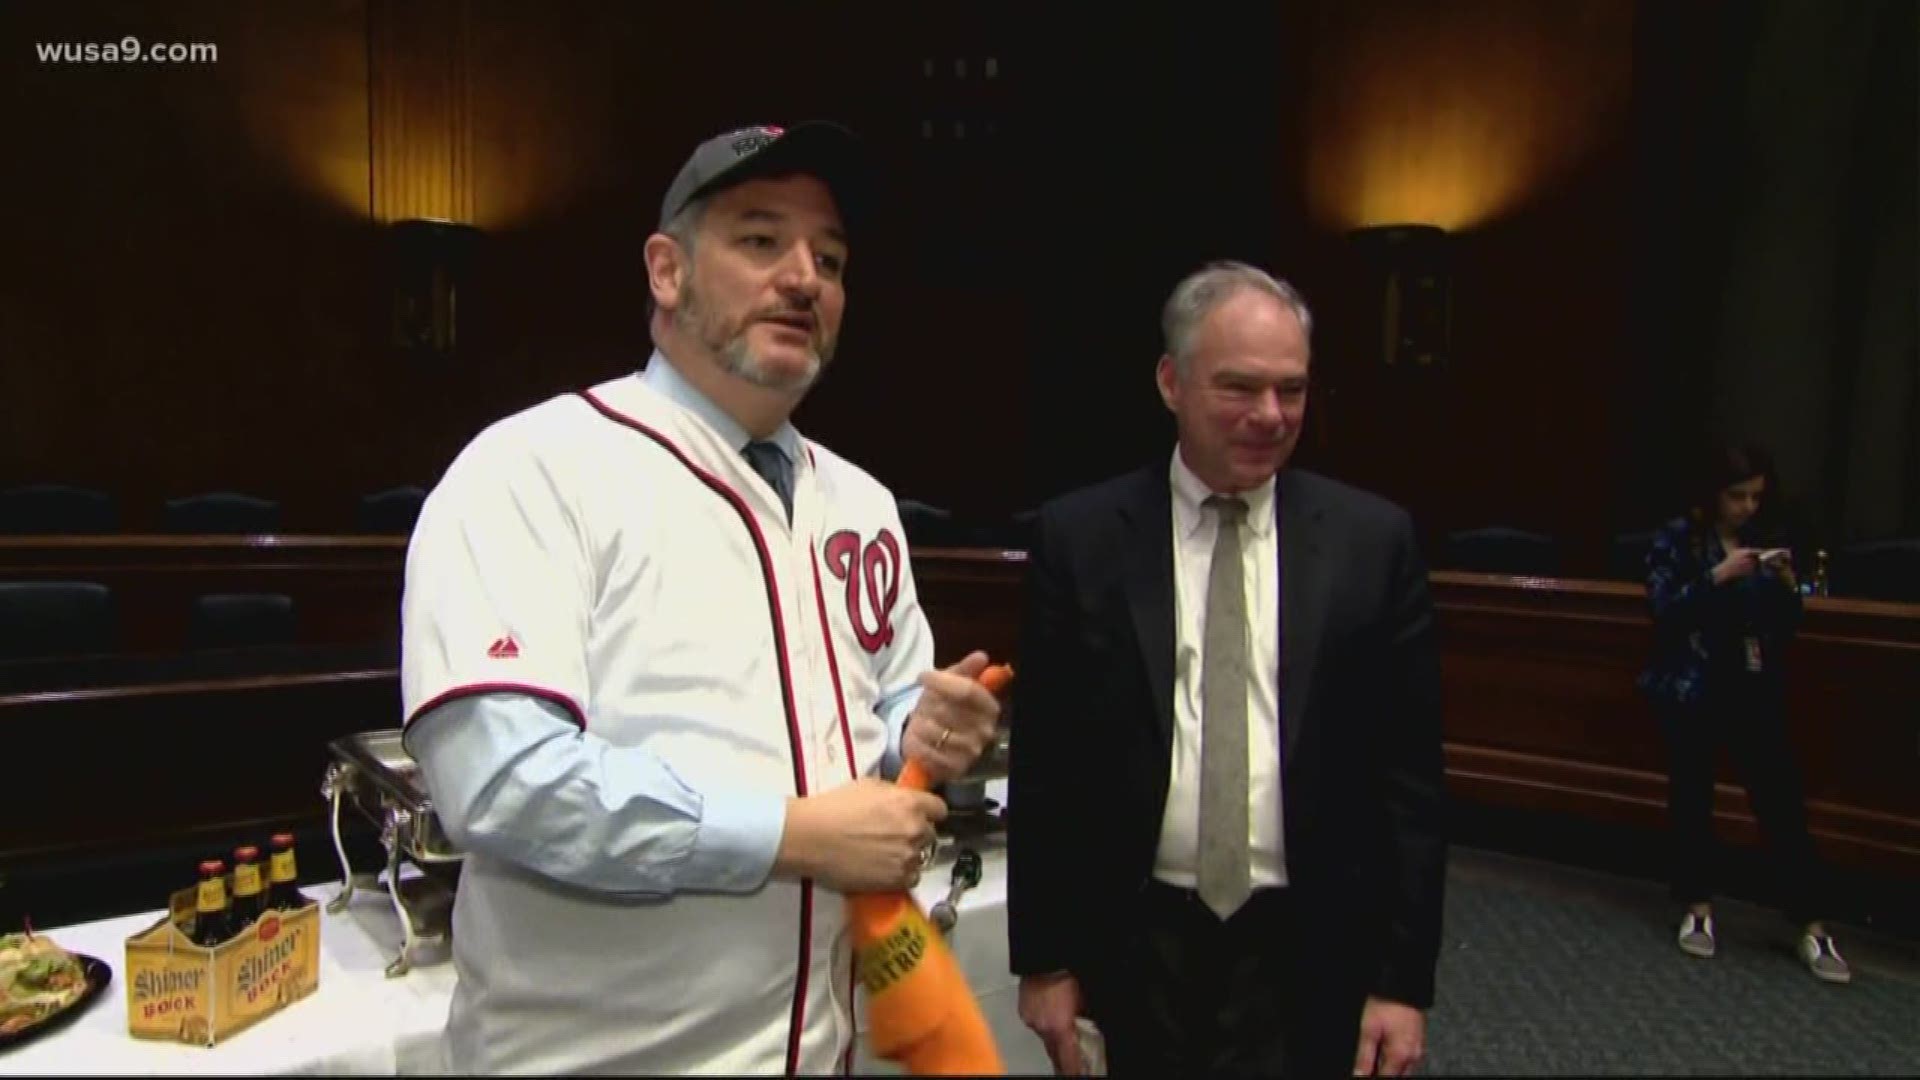 Sen. Cruz had to serve Sen. Kaine, and his staff, lunch, and had to wear a Nationals jersey and hat.